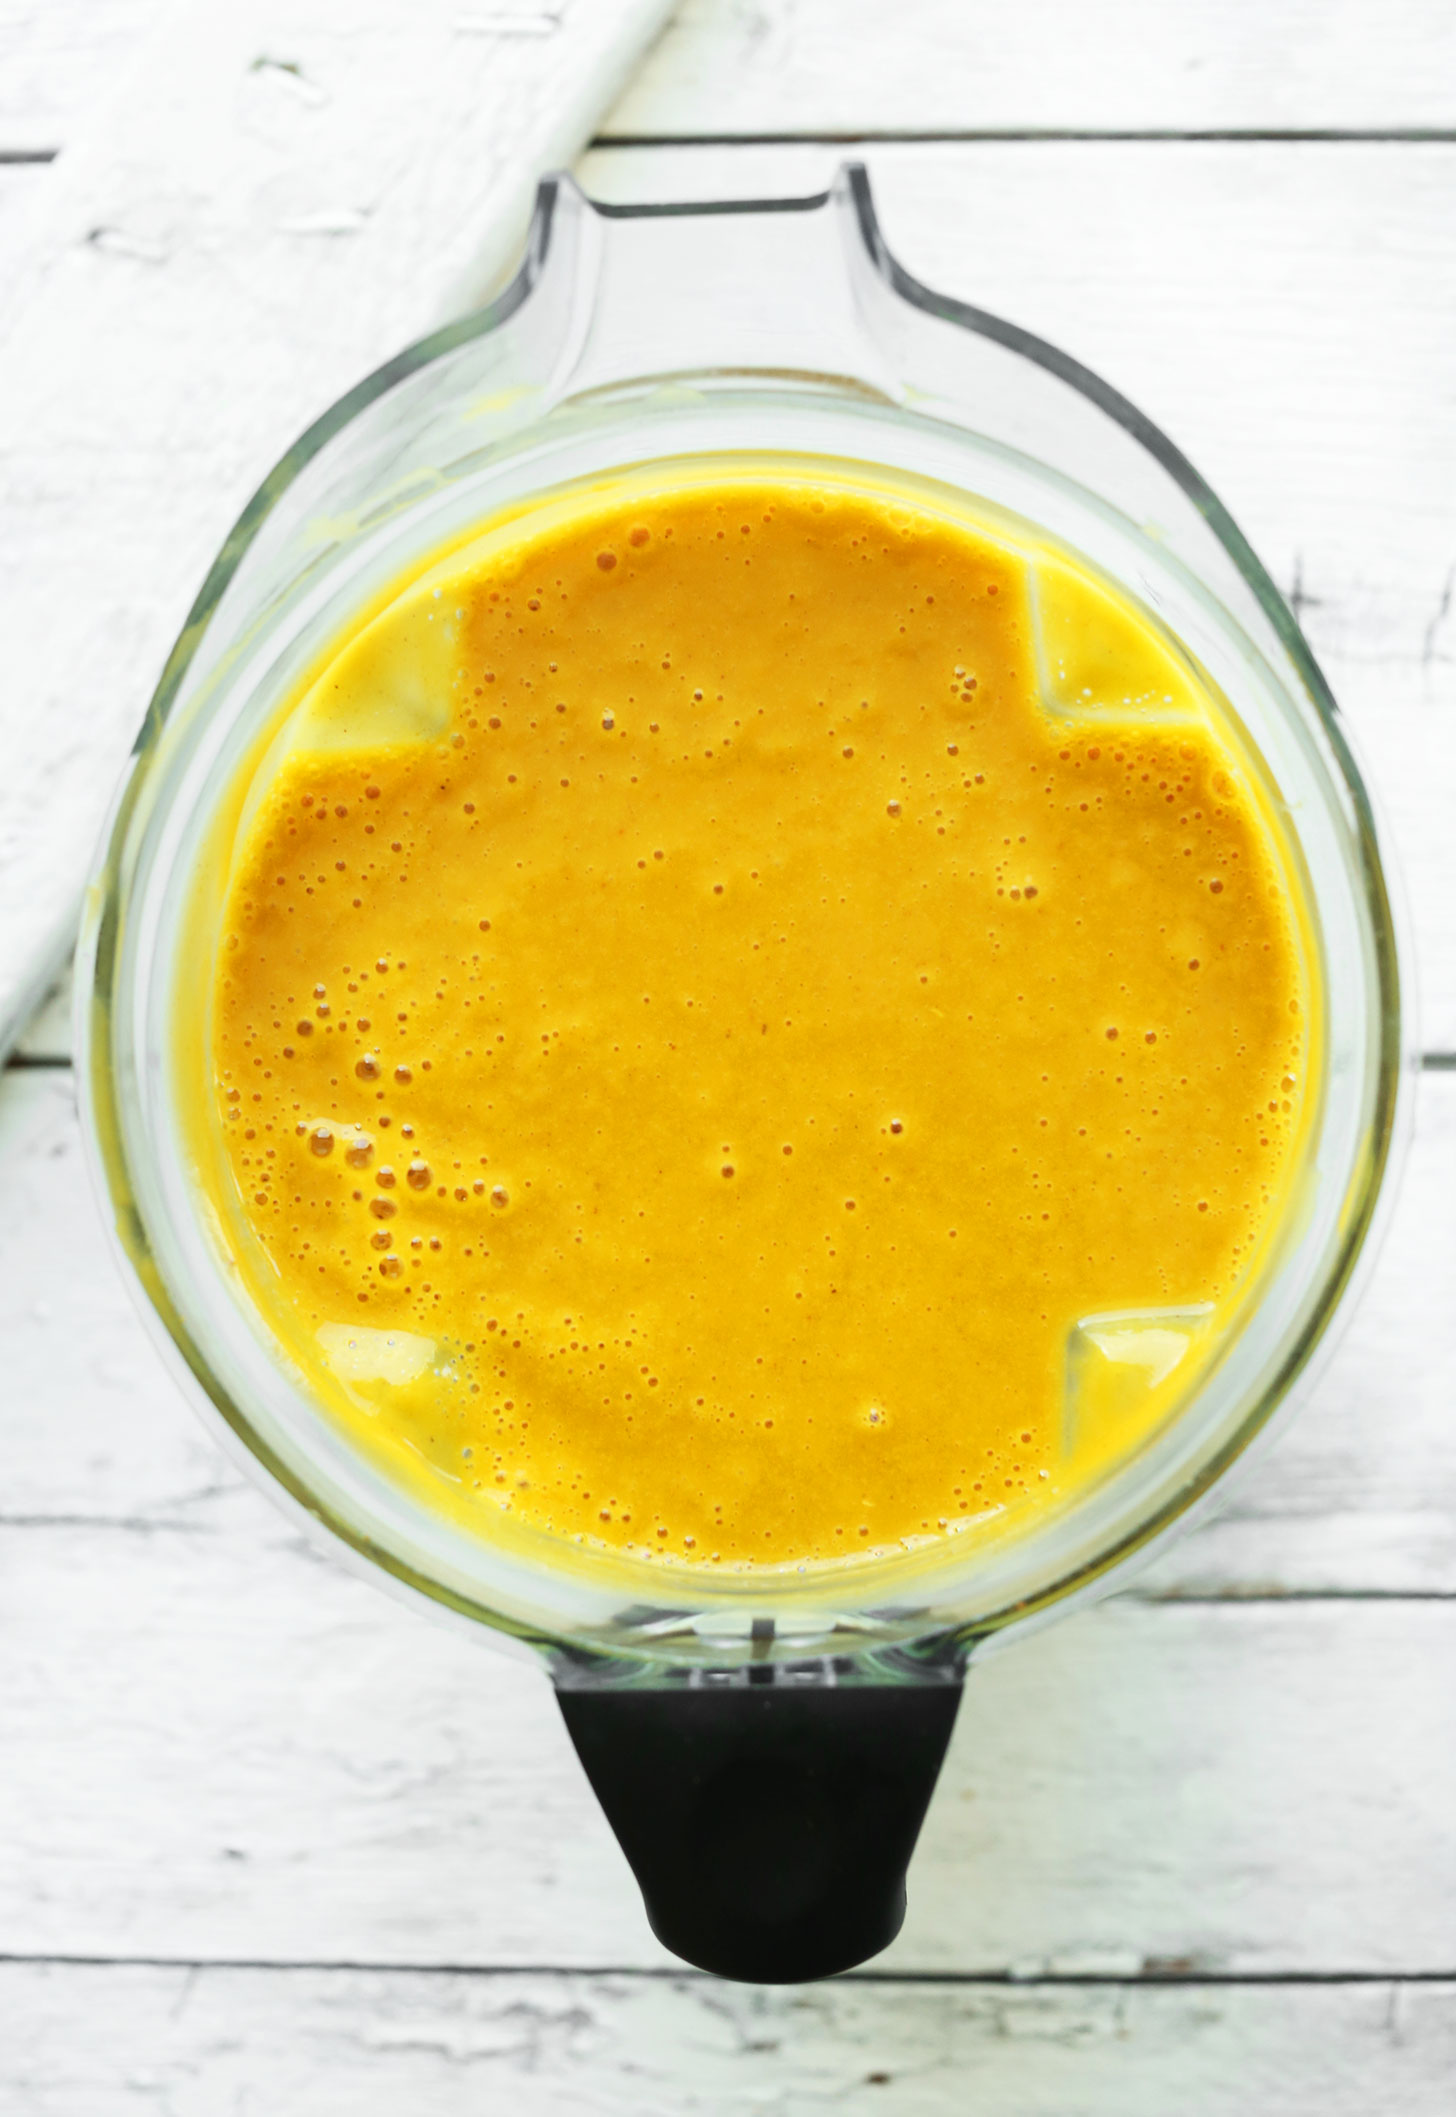 Blender filled with our delicious vegan gluten-free Curried Butternut Squash Soup recipe